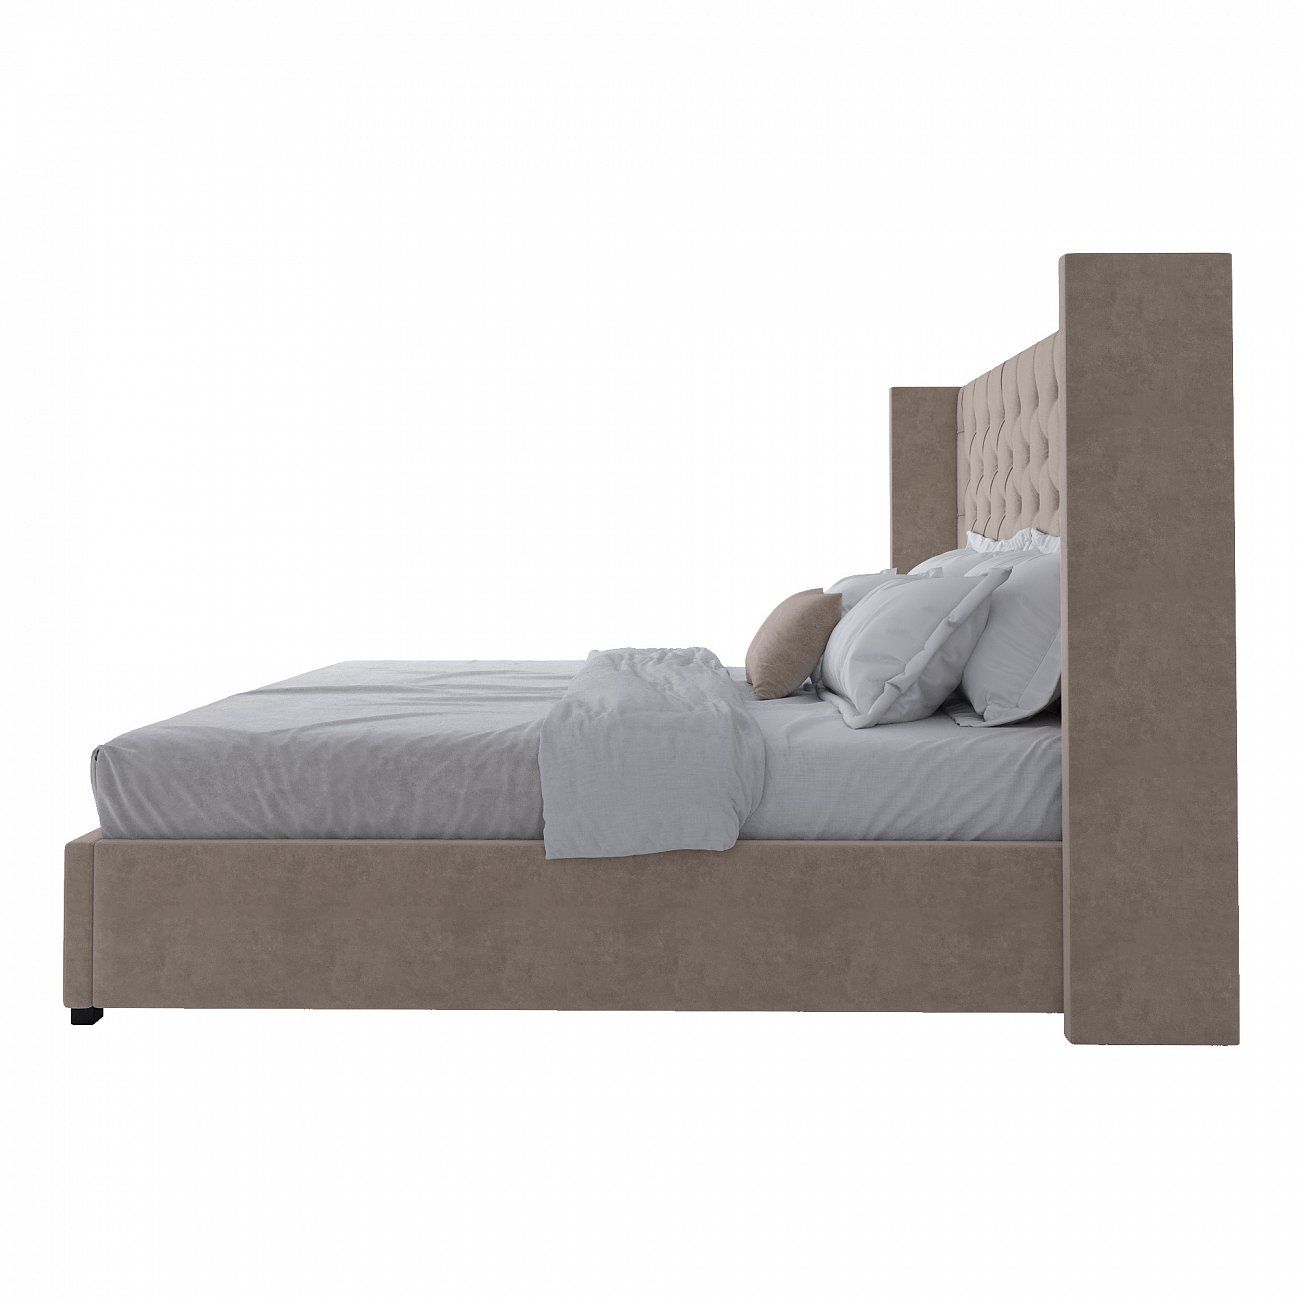 Double bed with upholstered headboard 200x200 cm beige Wing-2